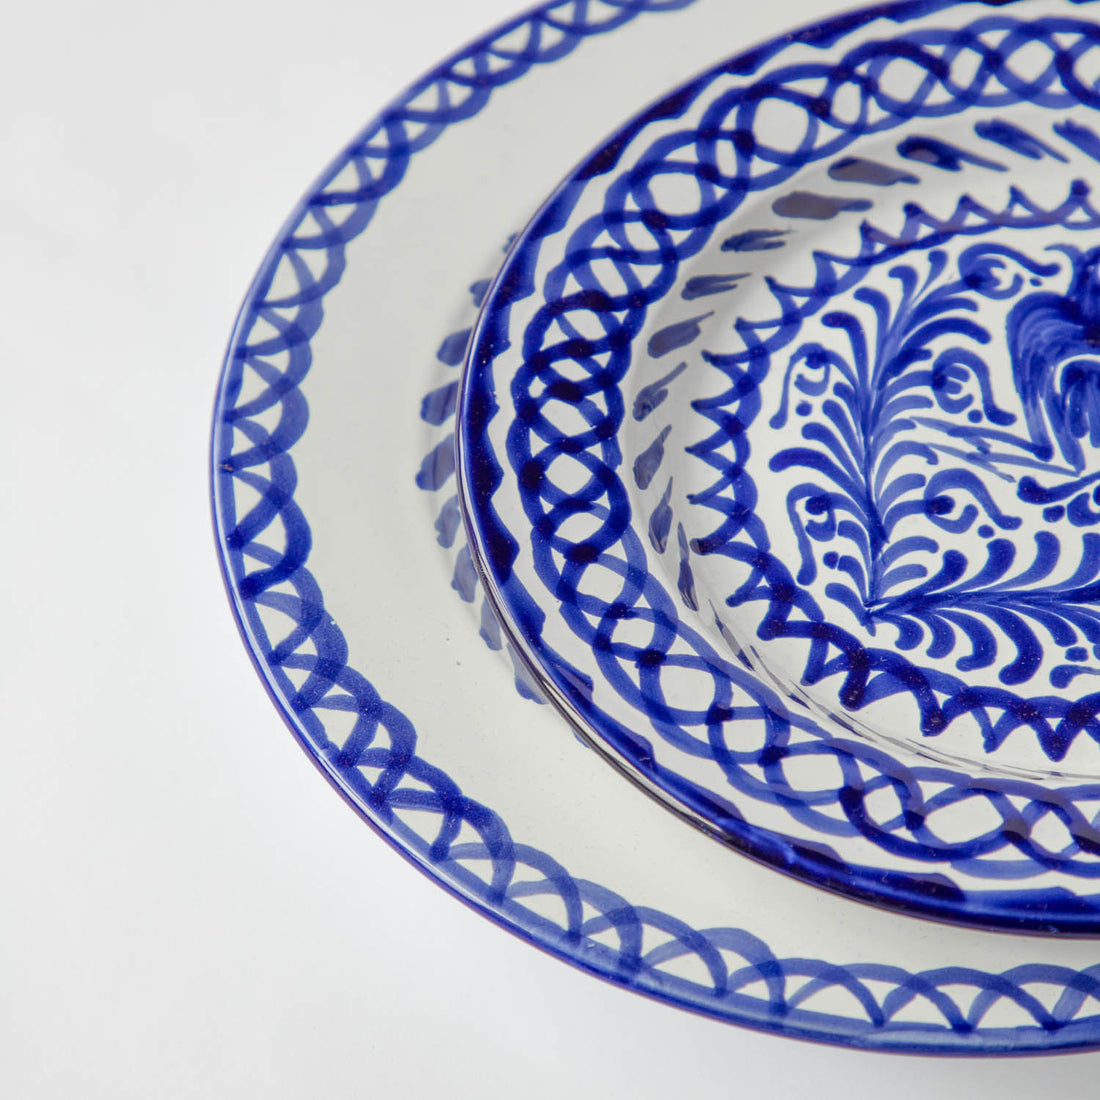 Blue and White Hand Painted Dinner Plates (Set of 2)